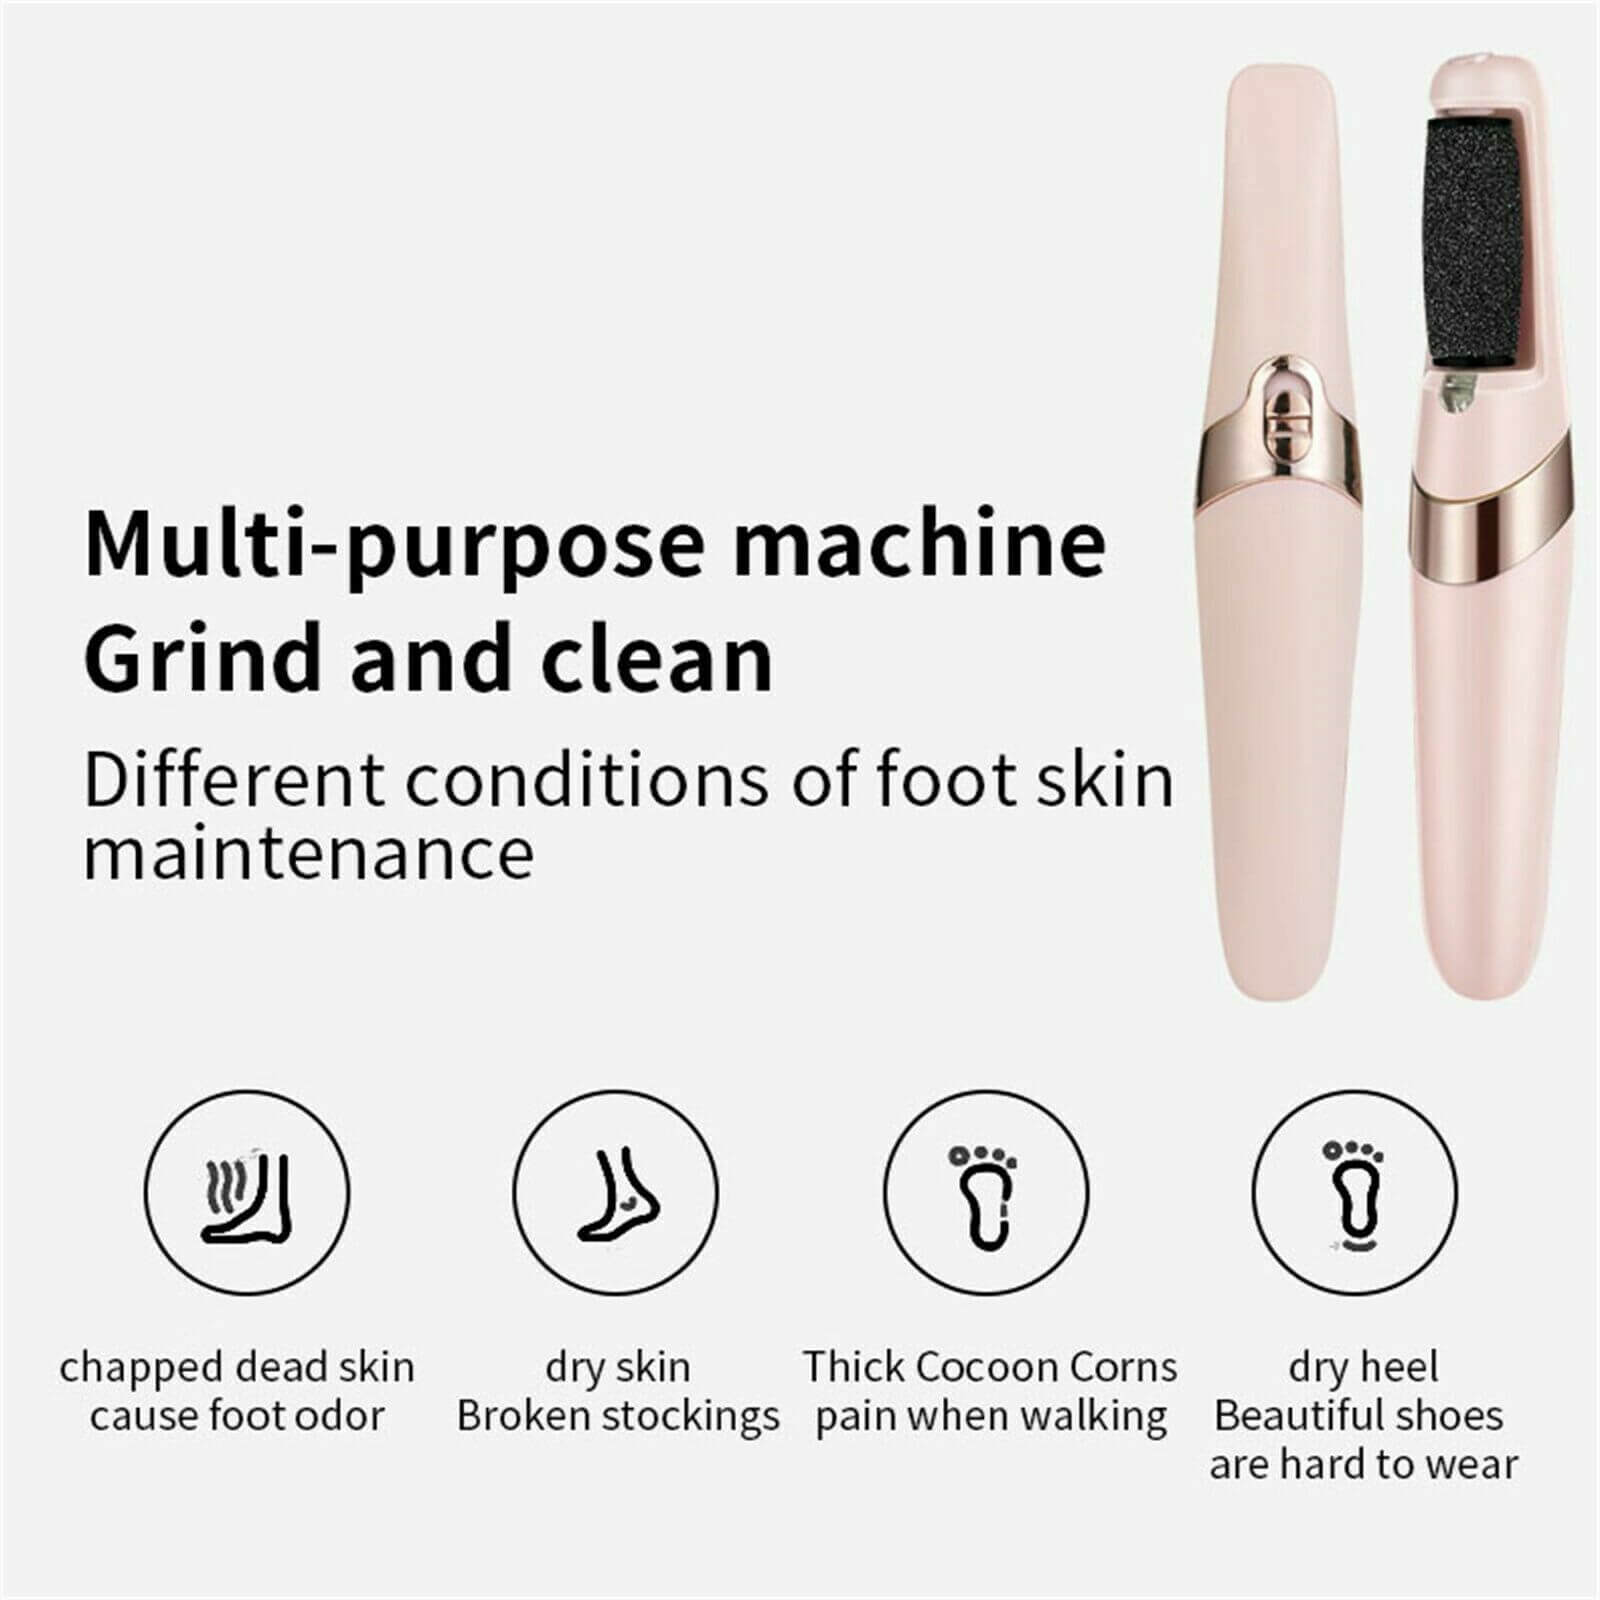 Smooth Pedicure Wand, Professional Pedicure Tools Set, Pedicure Tools For  Feet, For Home Spa Foot Experience - Removing Dry Skin To Make Feet